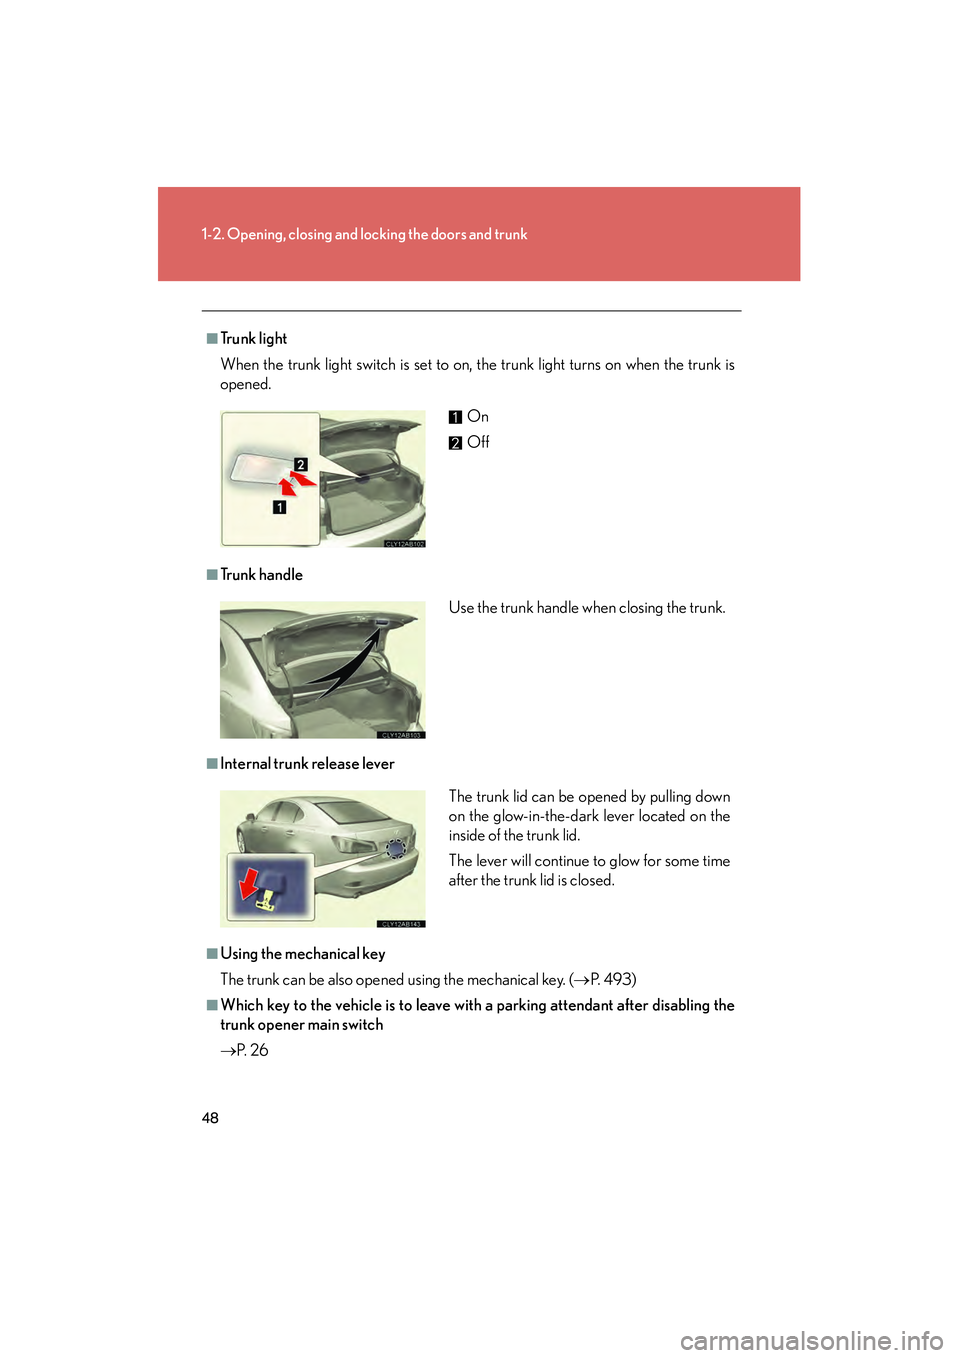 Lexus IS250 2011  Owners Manual 48
1-2. Opening, closing and locking the doors and trunk
IS350/250_U
■Trunk light
When the trunk light switch is set to on, the trunk light turns on when the trunk is
opened. 
■Tr u n k  h a n d l